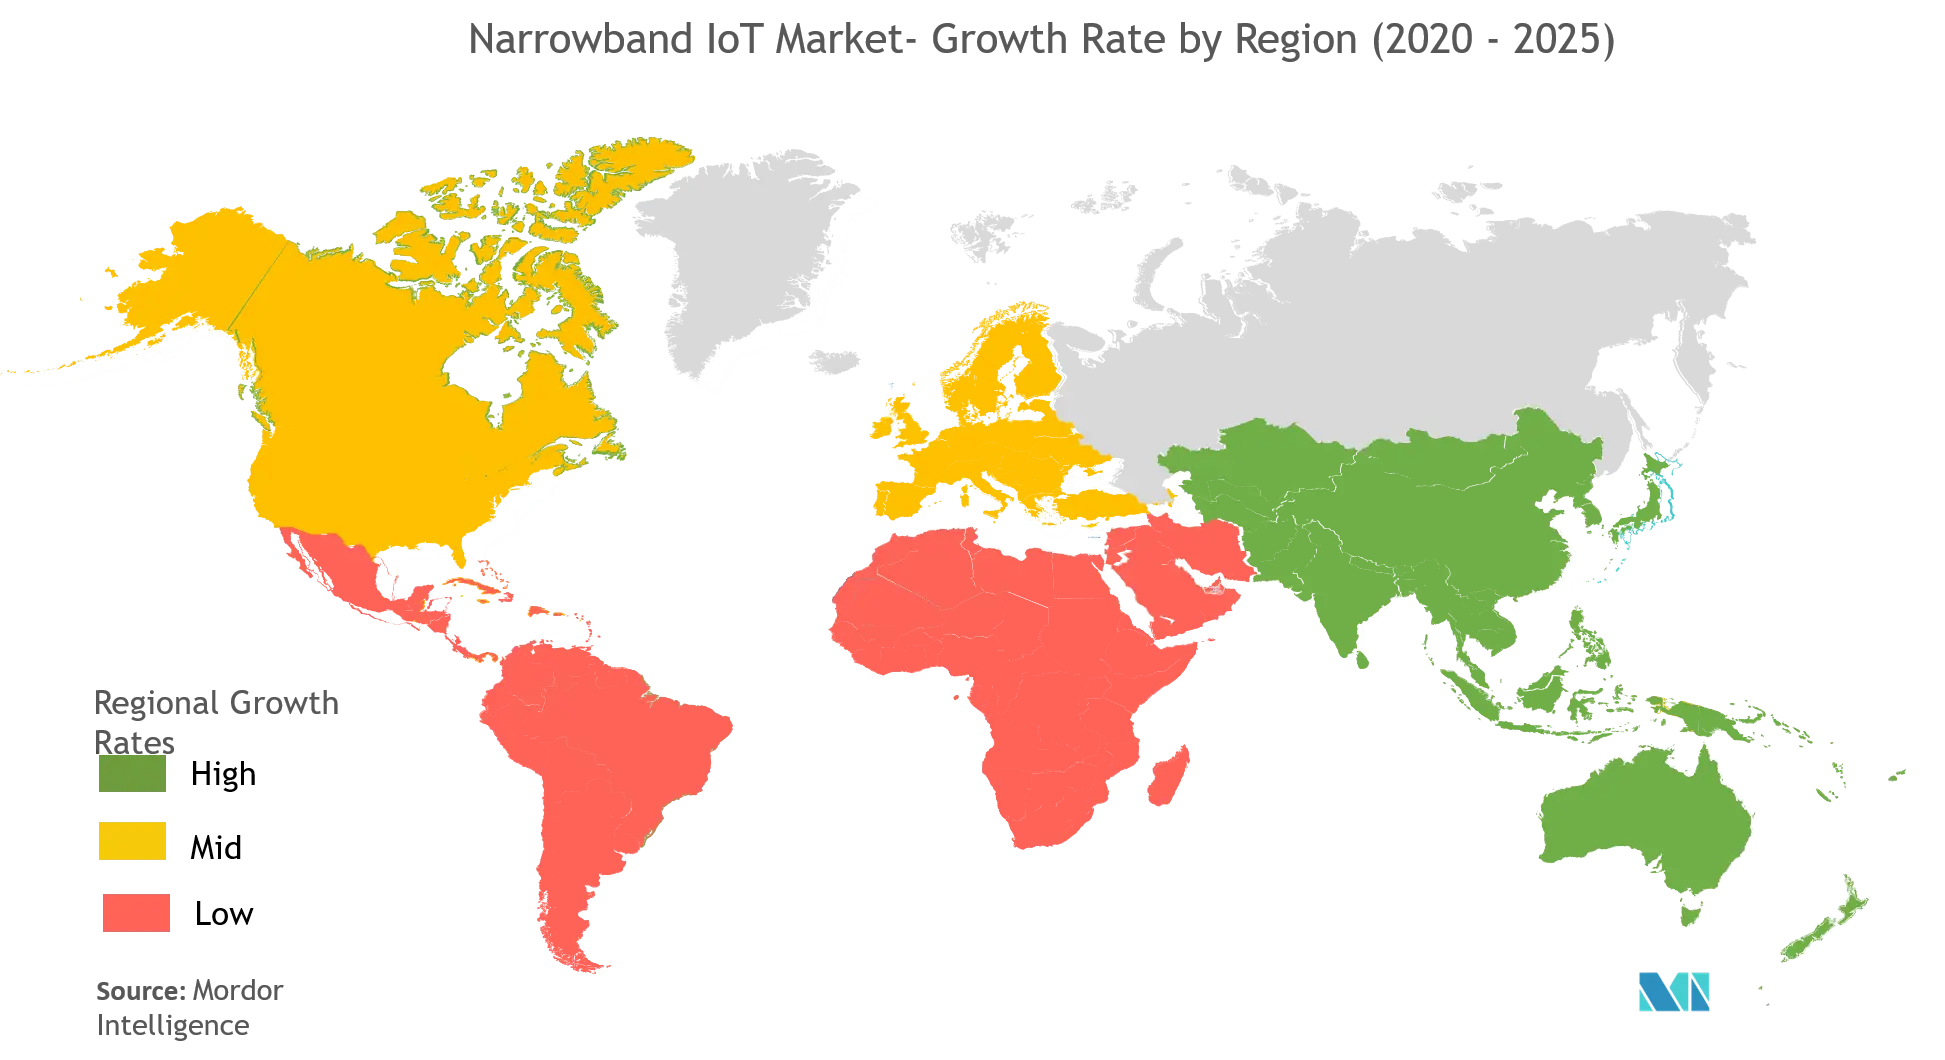 Narrowband IoT Market - Growth Rate by Region  (2020-2025)